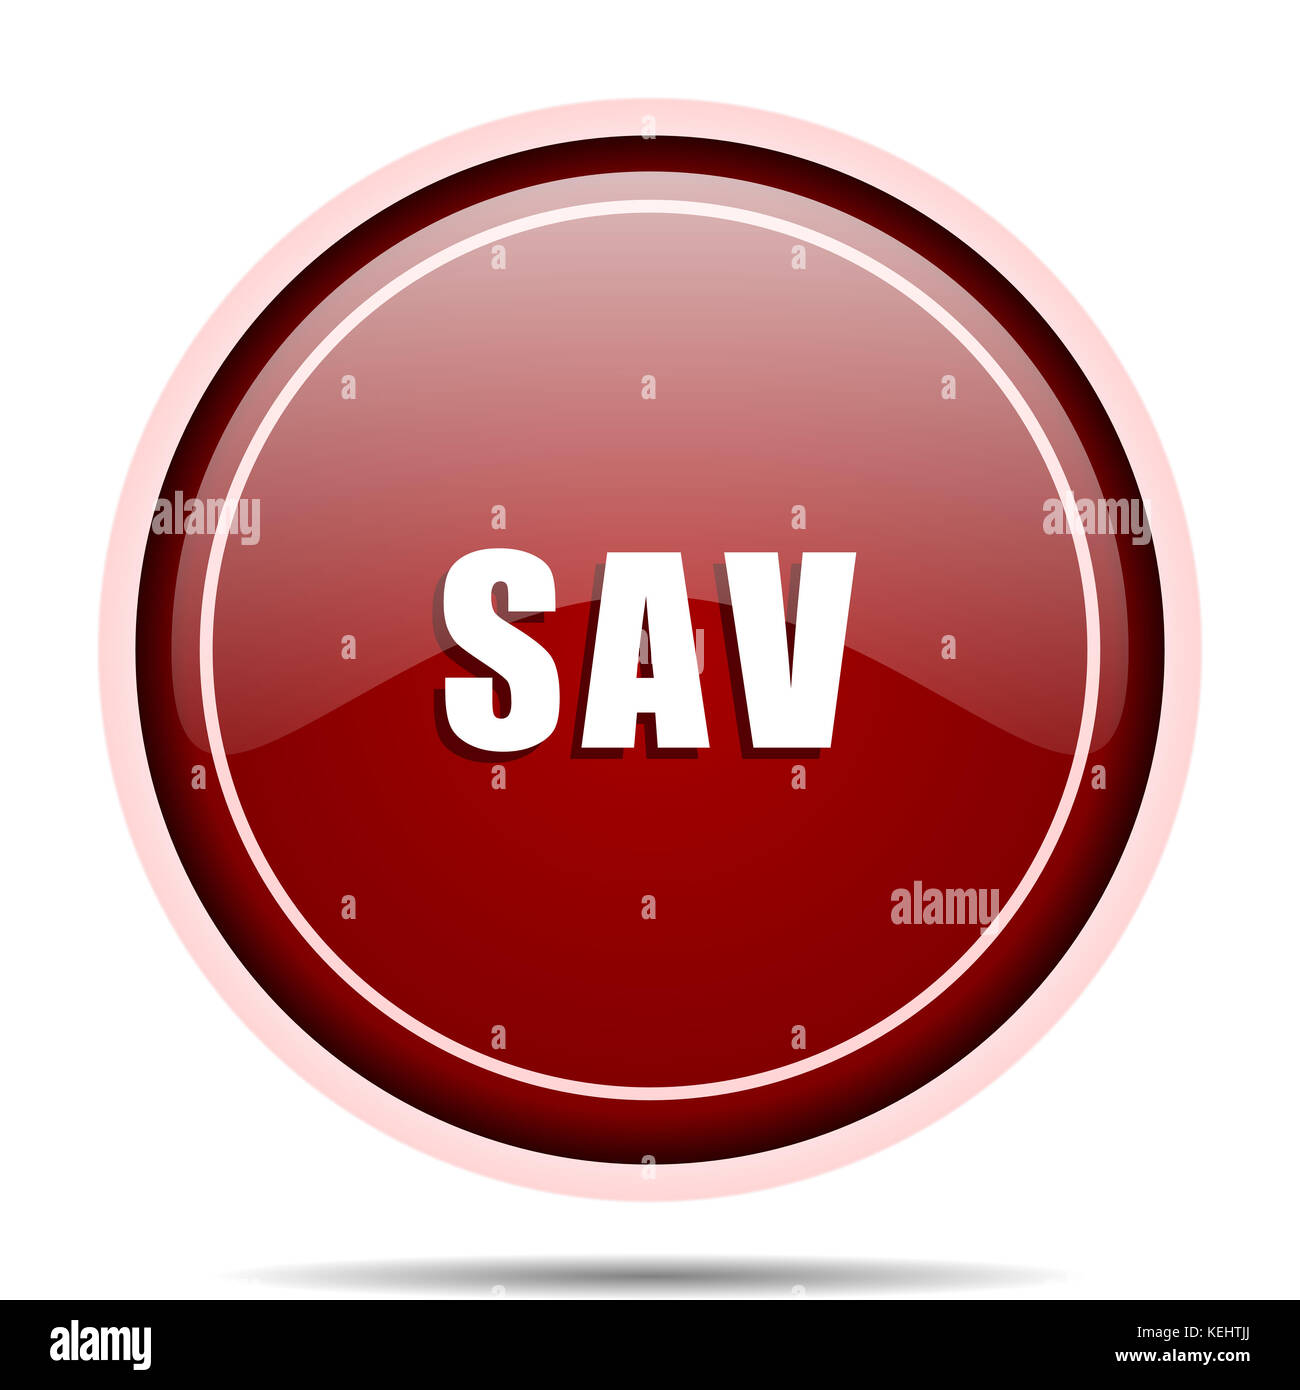 Sav red glossy round web icon. Circle isolated internet button for webdesign and smartphone applications. Stock Photo